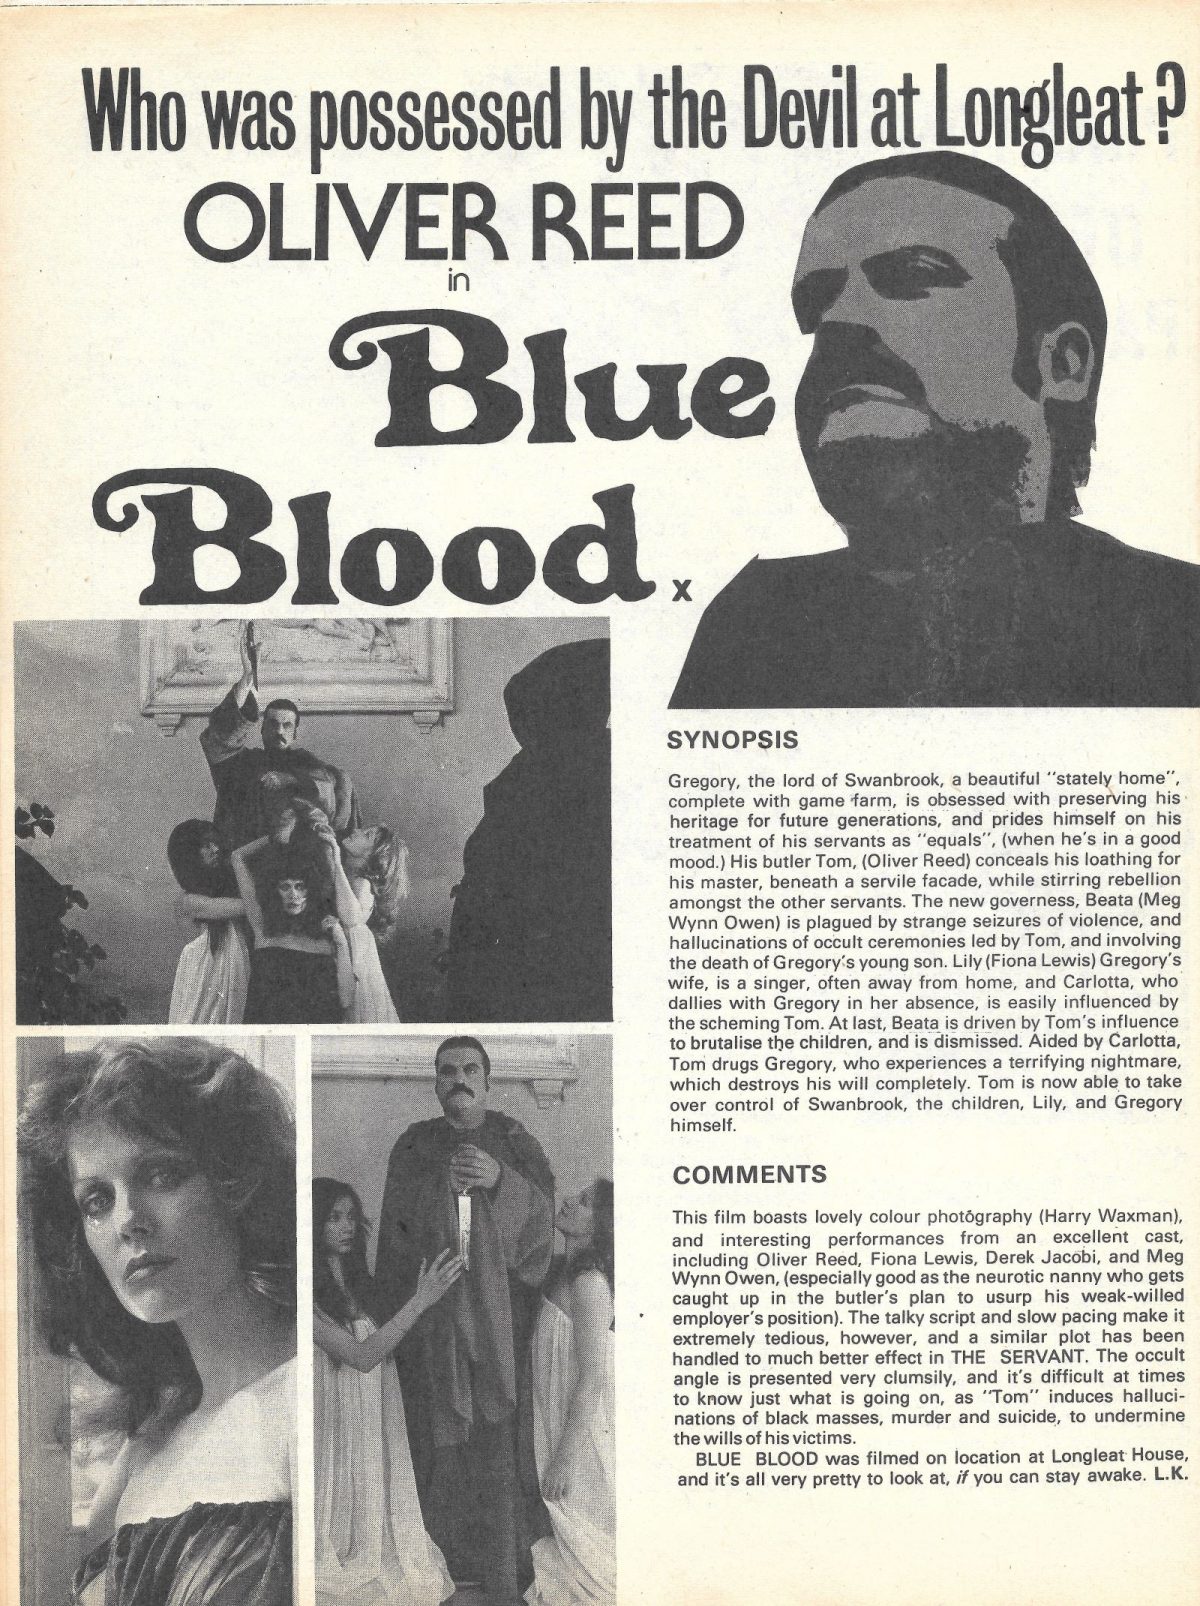 World of Horror, magazines, 1970s, horror movies, Peter Cushing, Christopher Lee, Vincent Price, cult, occult, Oliver Reed